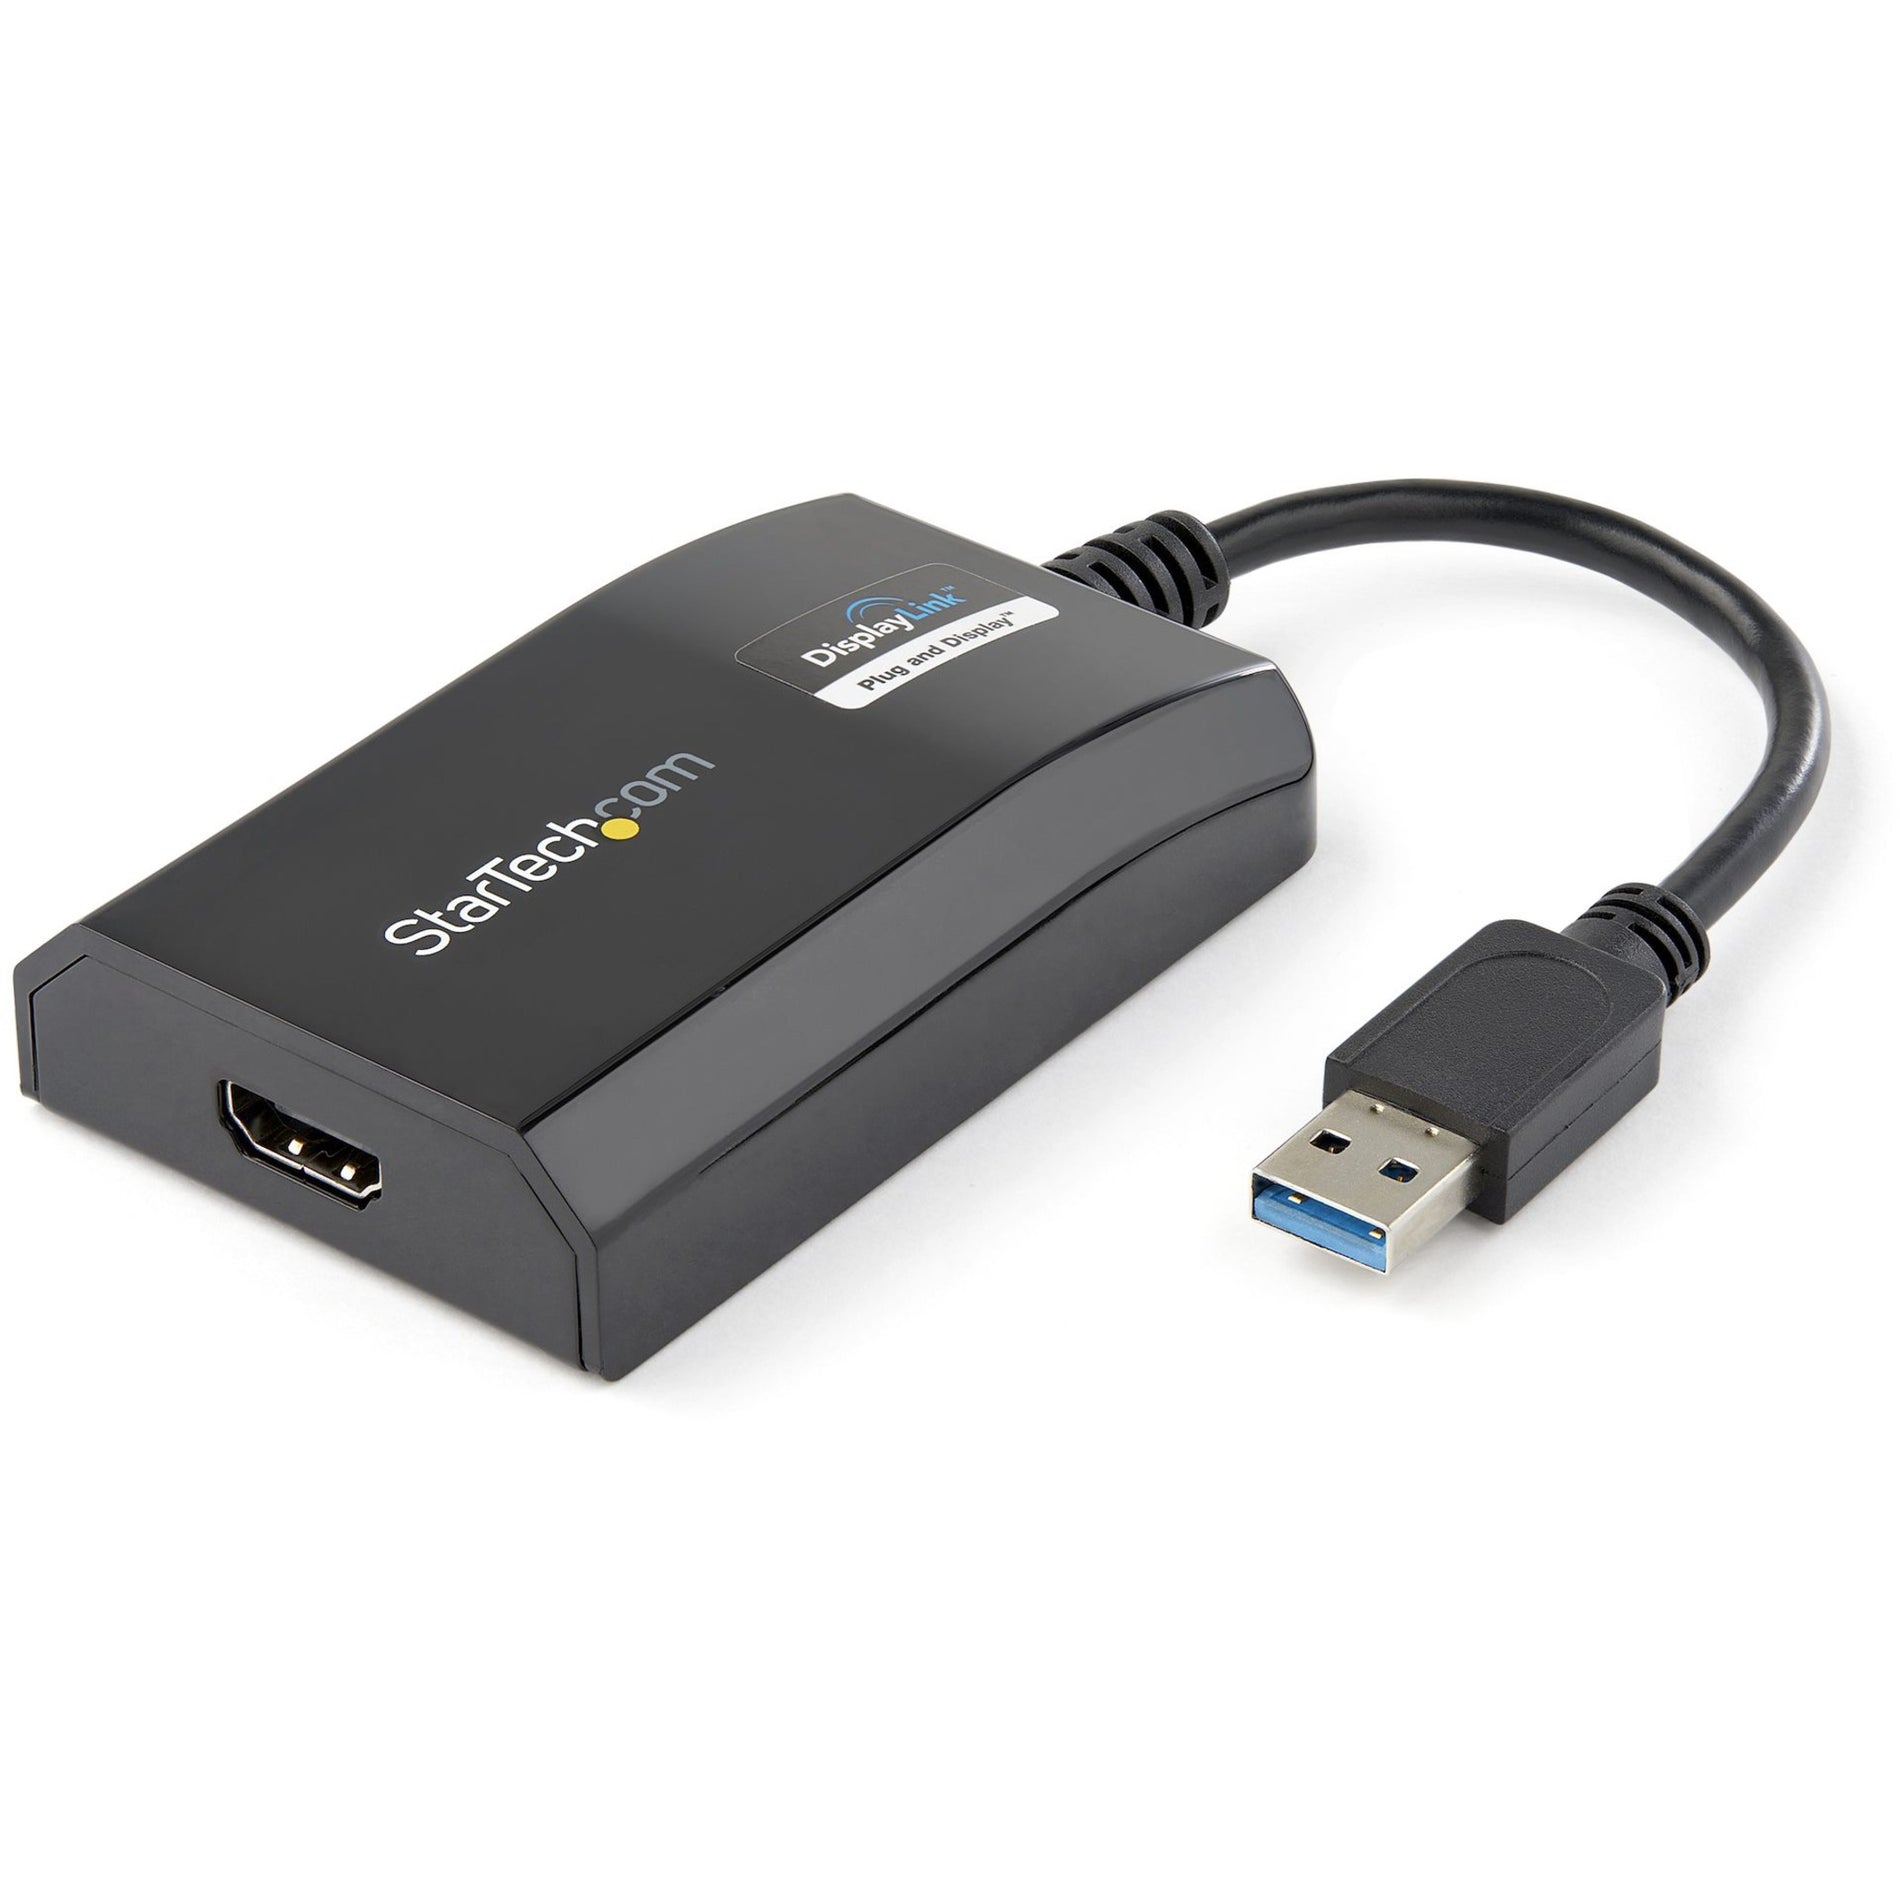 StarTech.com USB32HDPRO USB 3.0 to HDMI Video Adapter for Mac & PC, Enhance Your Display with Ease